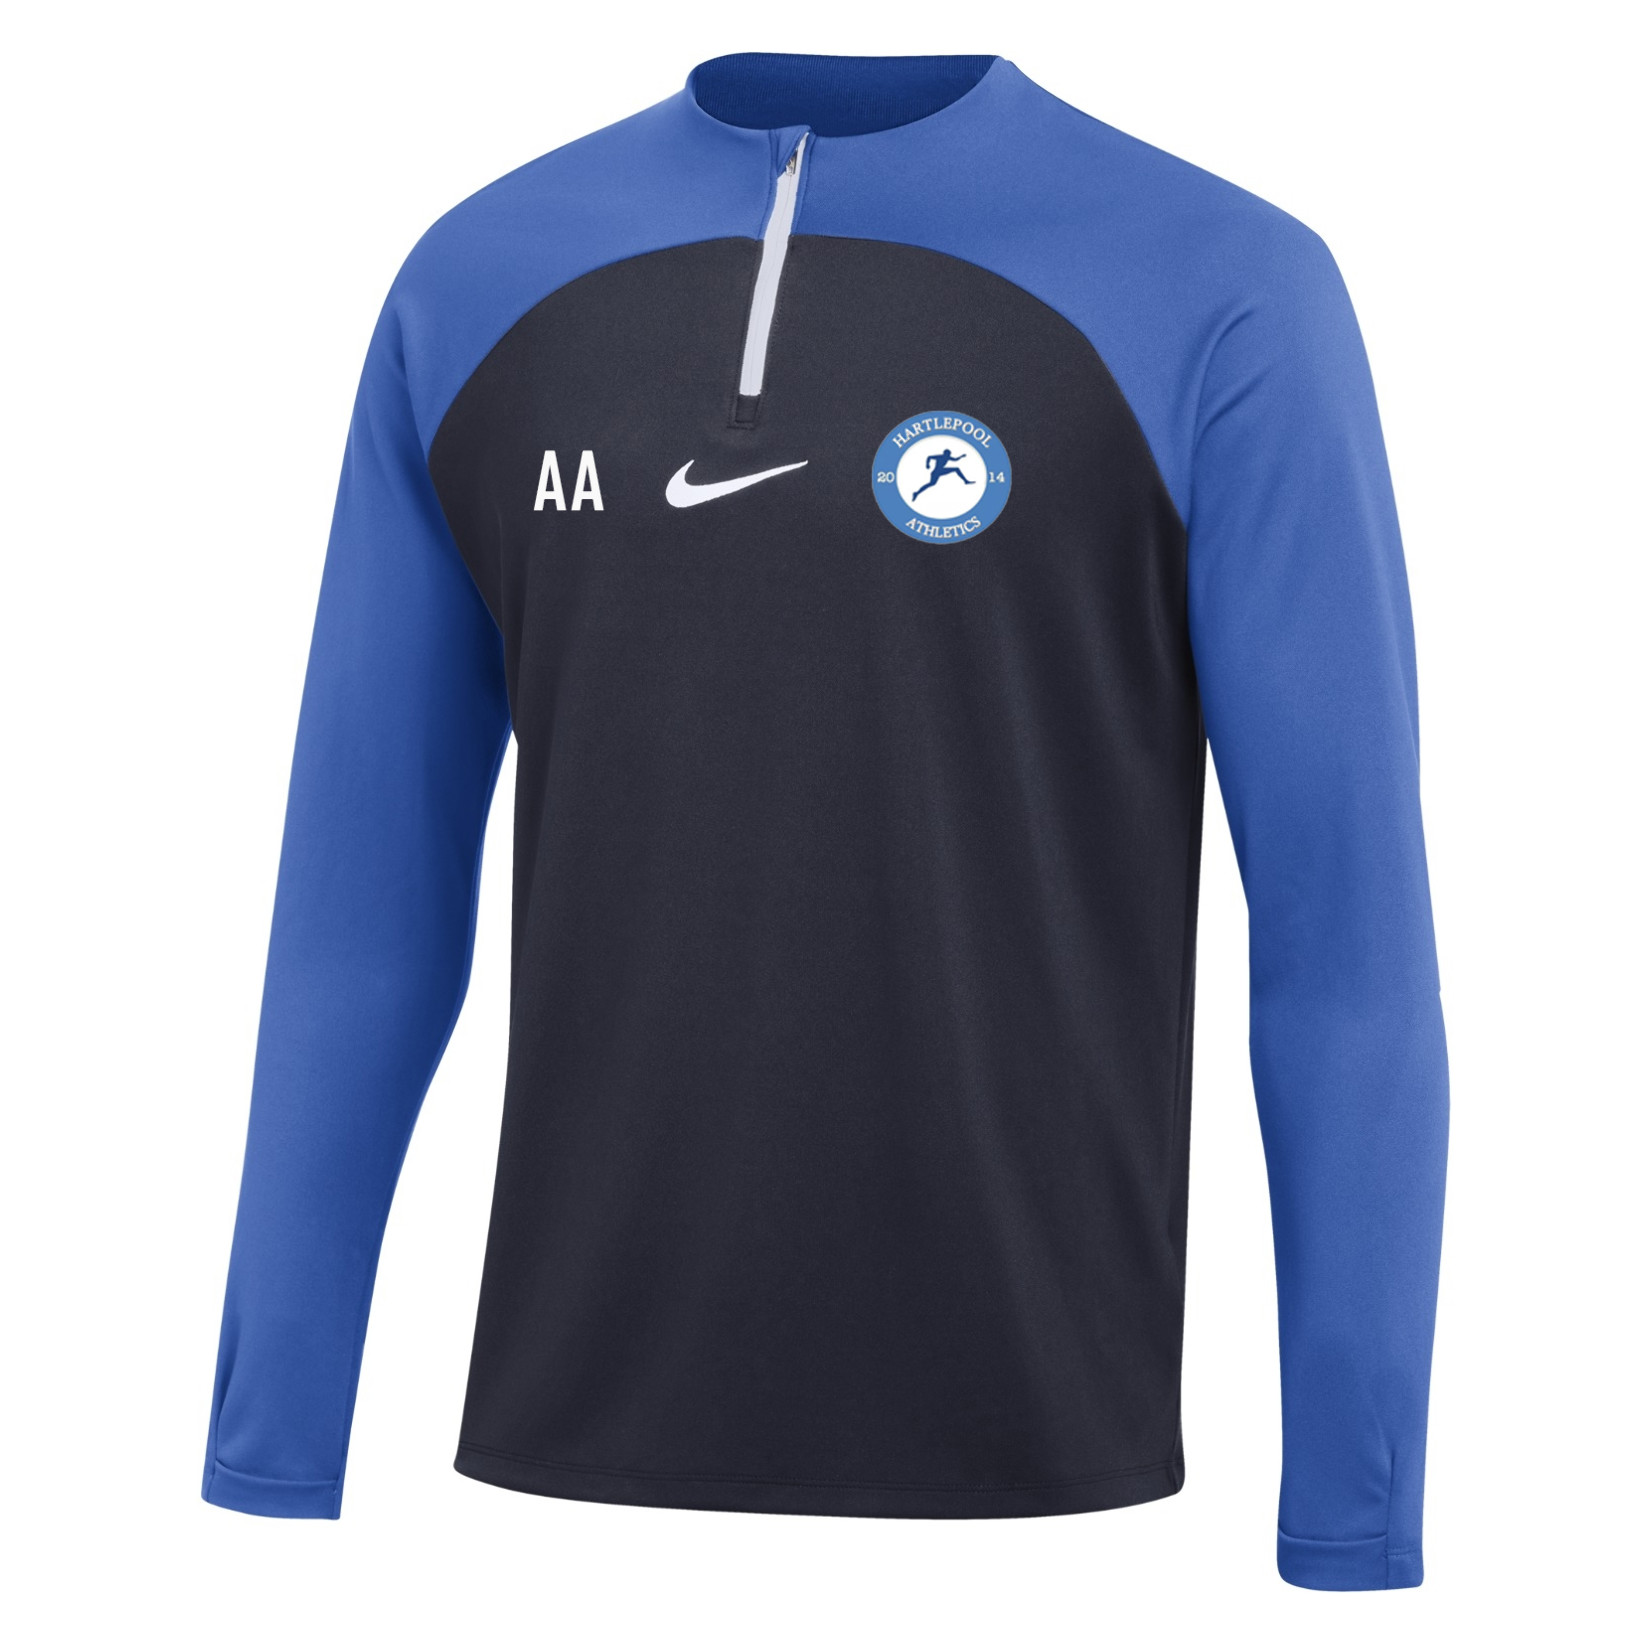 Nike Academy Pro Midlayer Drill Top Obsidian-Royal Blue-White